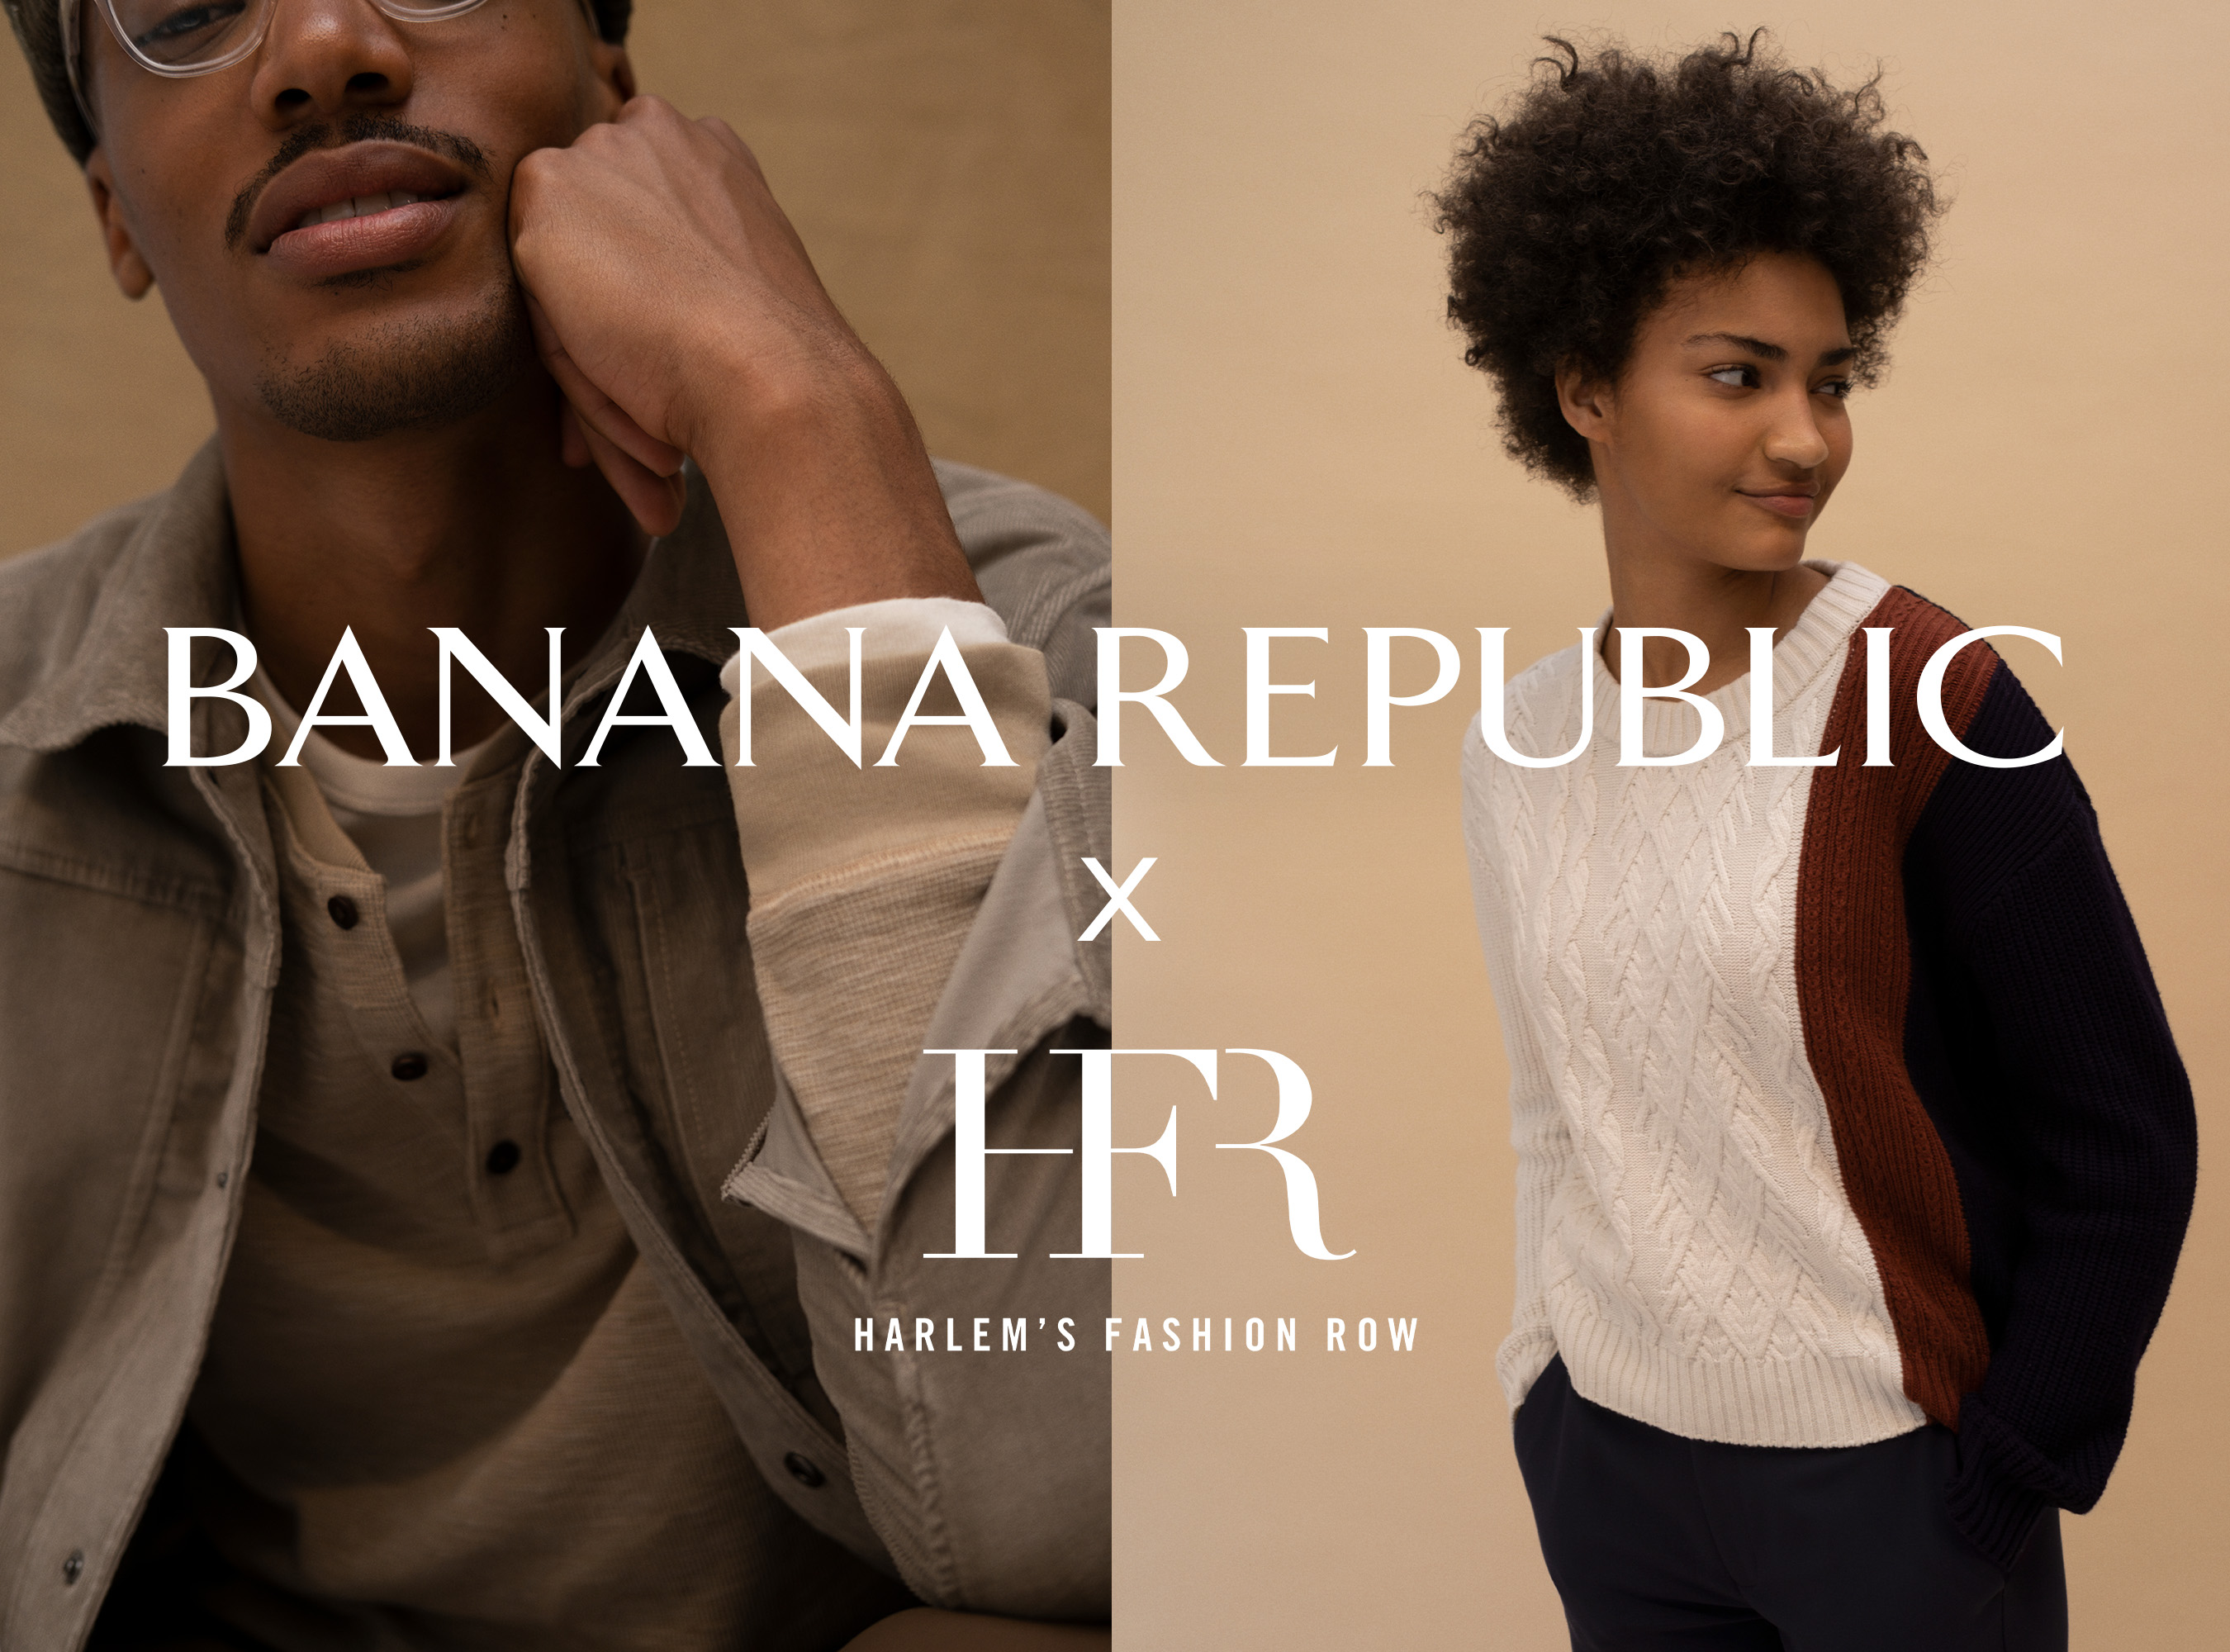 Banana Republic x Harlem Front Row Launch Competition For BIPOC Designers